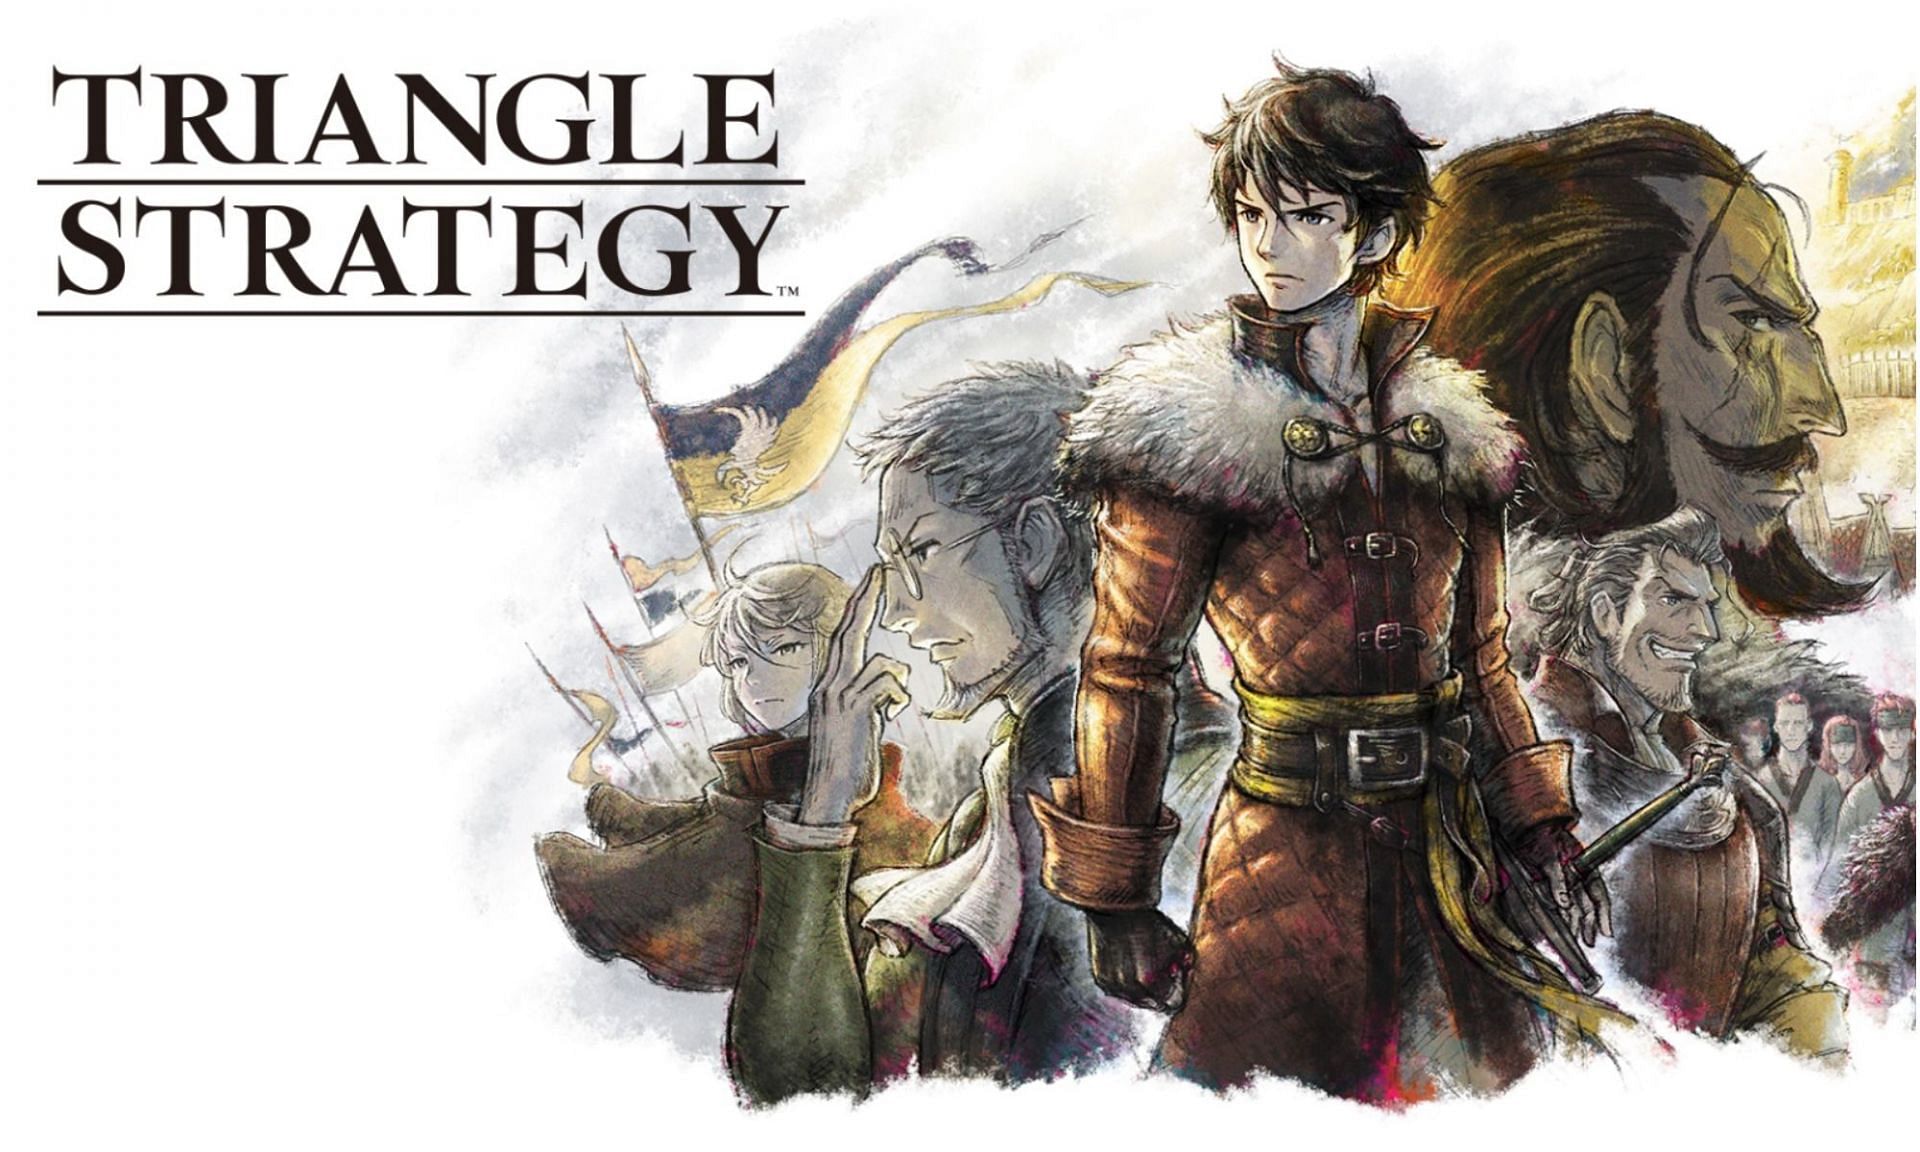 Triangle Strategy succeeded on a global scale, selling nearly 800,000 units, according to Square Enix (Image via Square Enix)